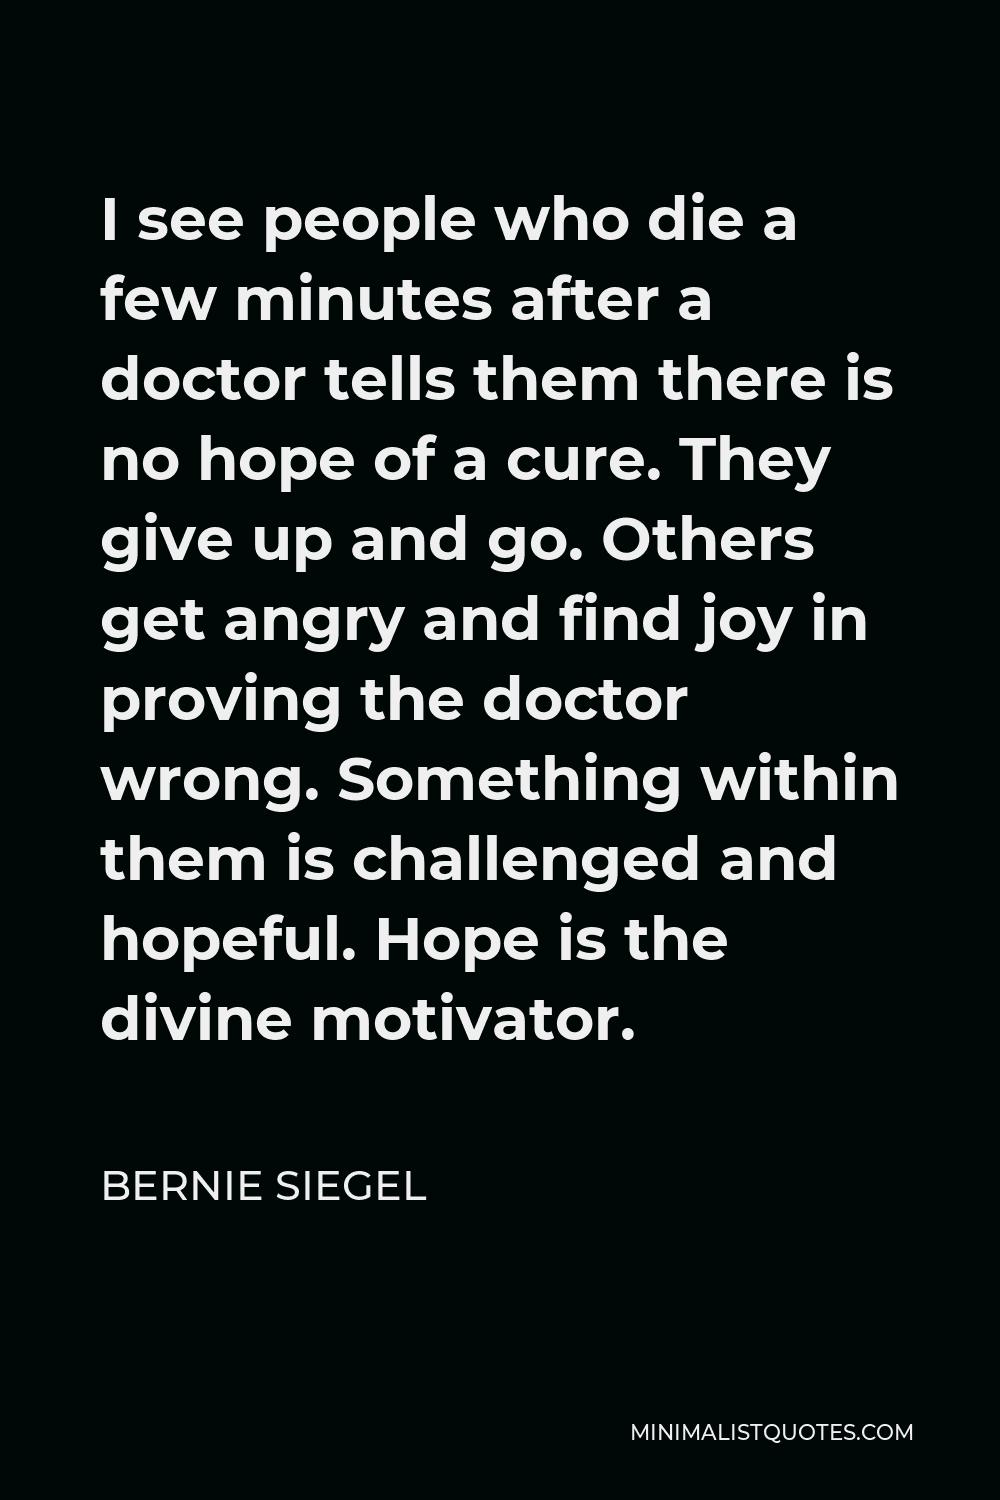 Bernie Siegel Quote - I see people who die a few minutes after a doctor tells them there is no hope of a cure. They give up and go. Others get angry and find joy in proving the doctor wrong. Something within them is challenged and hopeful. Hope is the divine motivator.